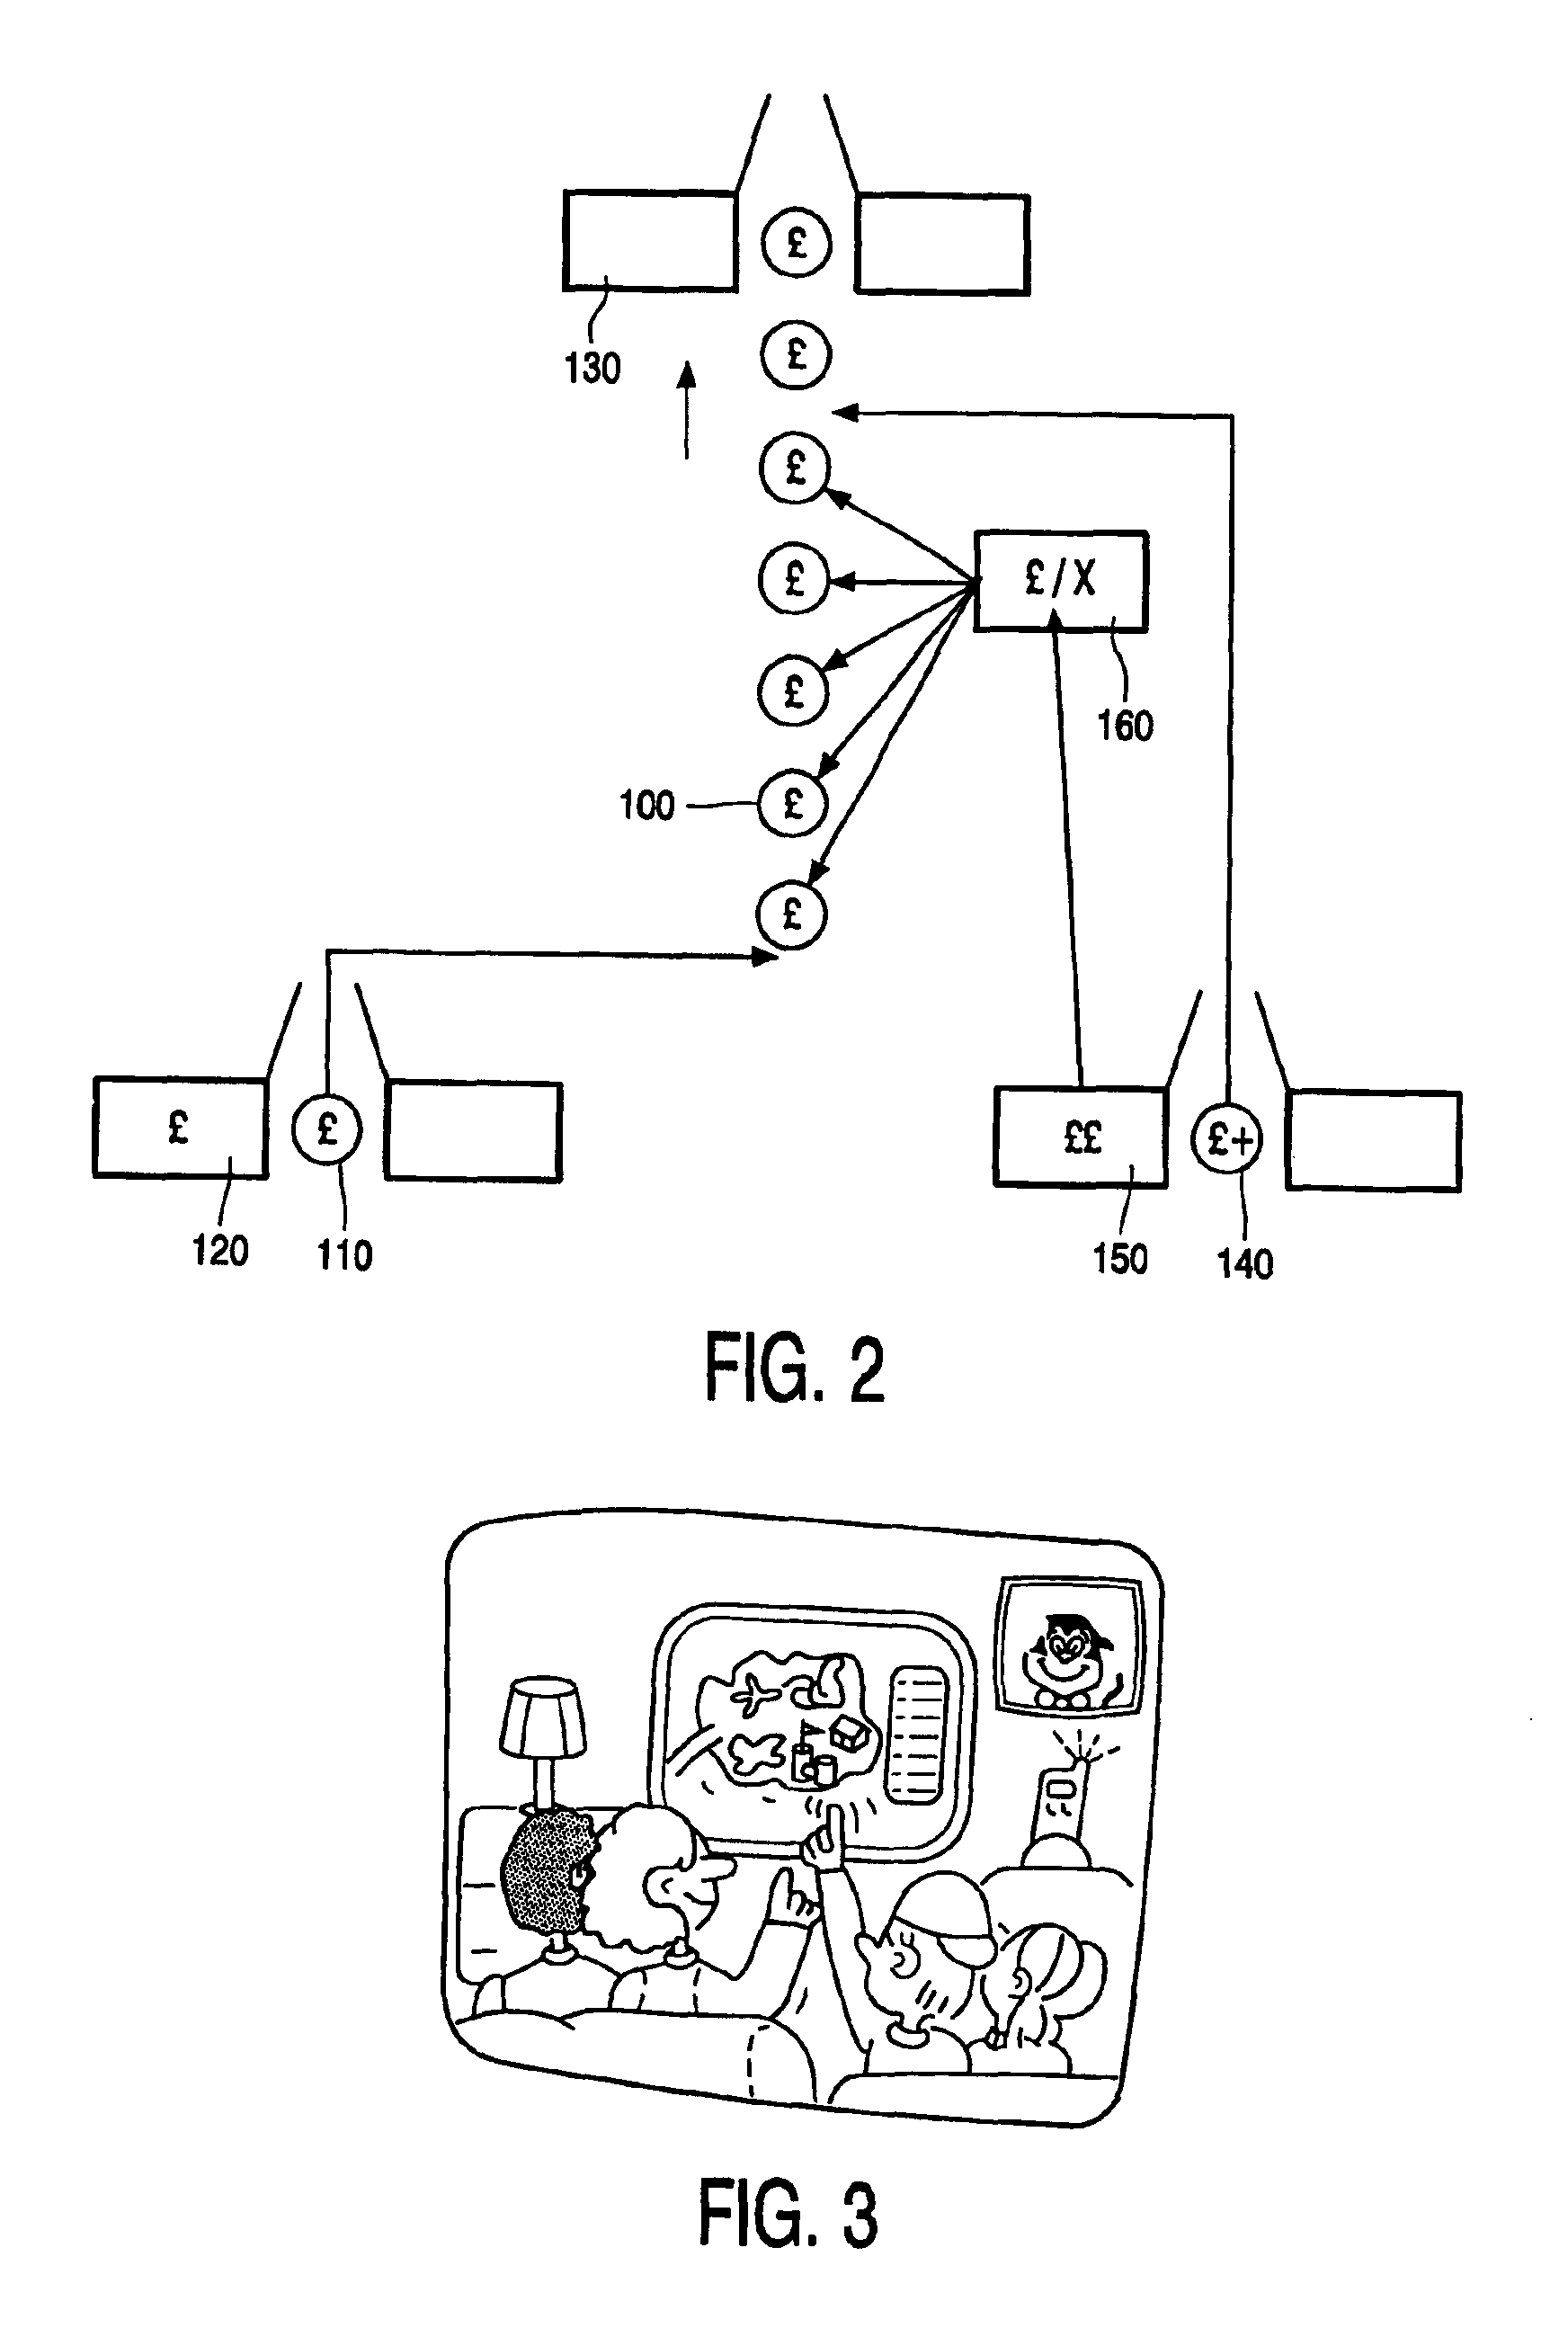 Method and system for electronic route planning and virtual queue handling